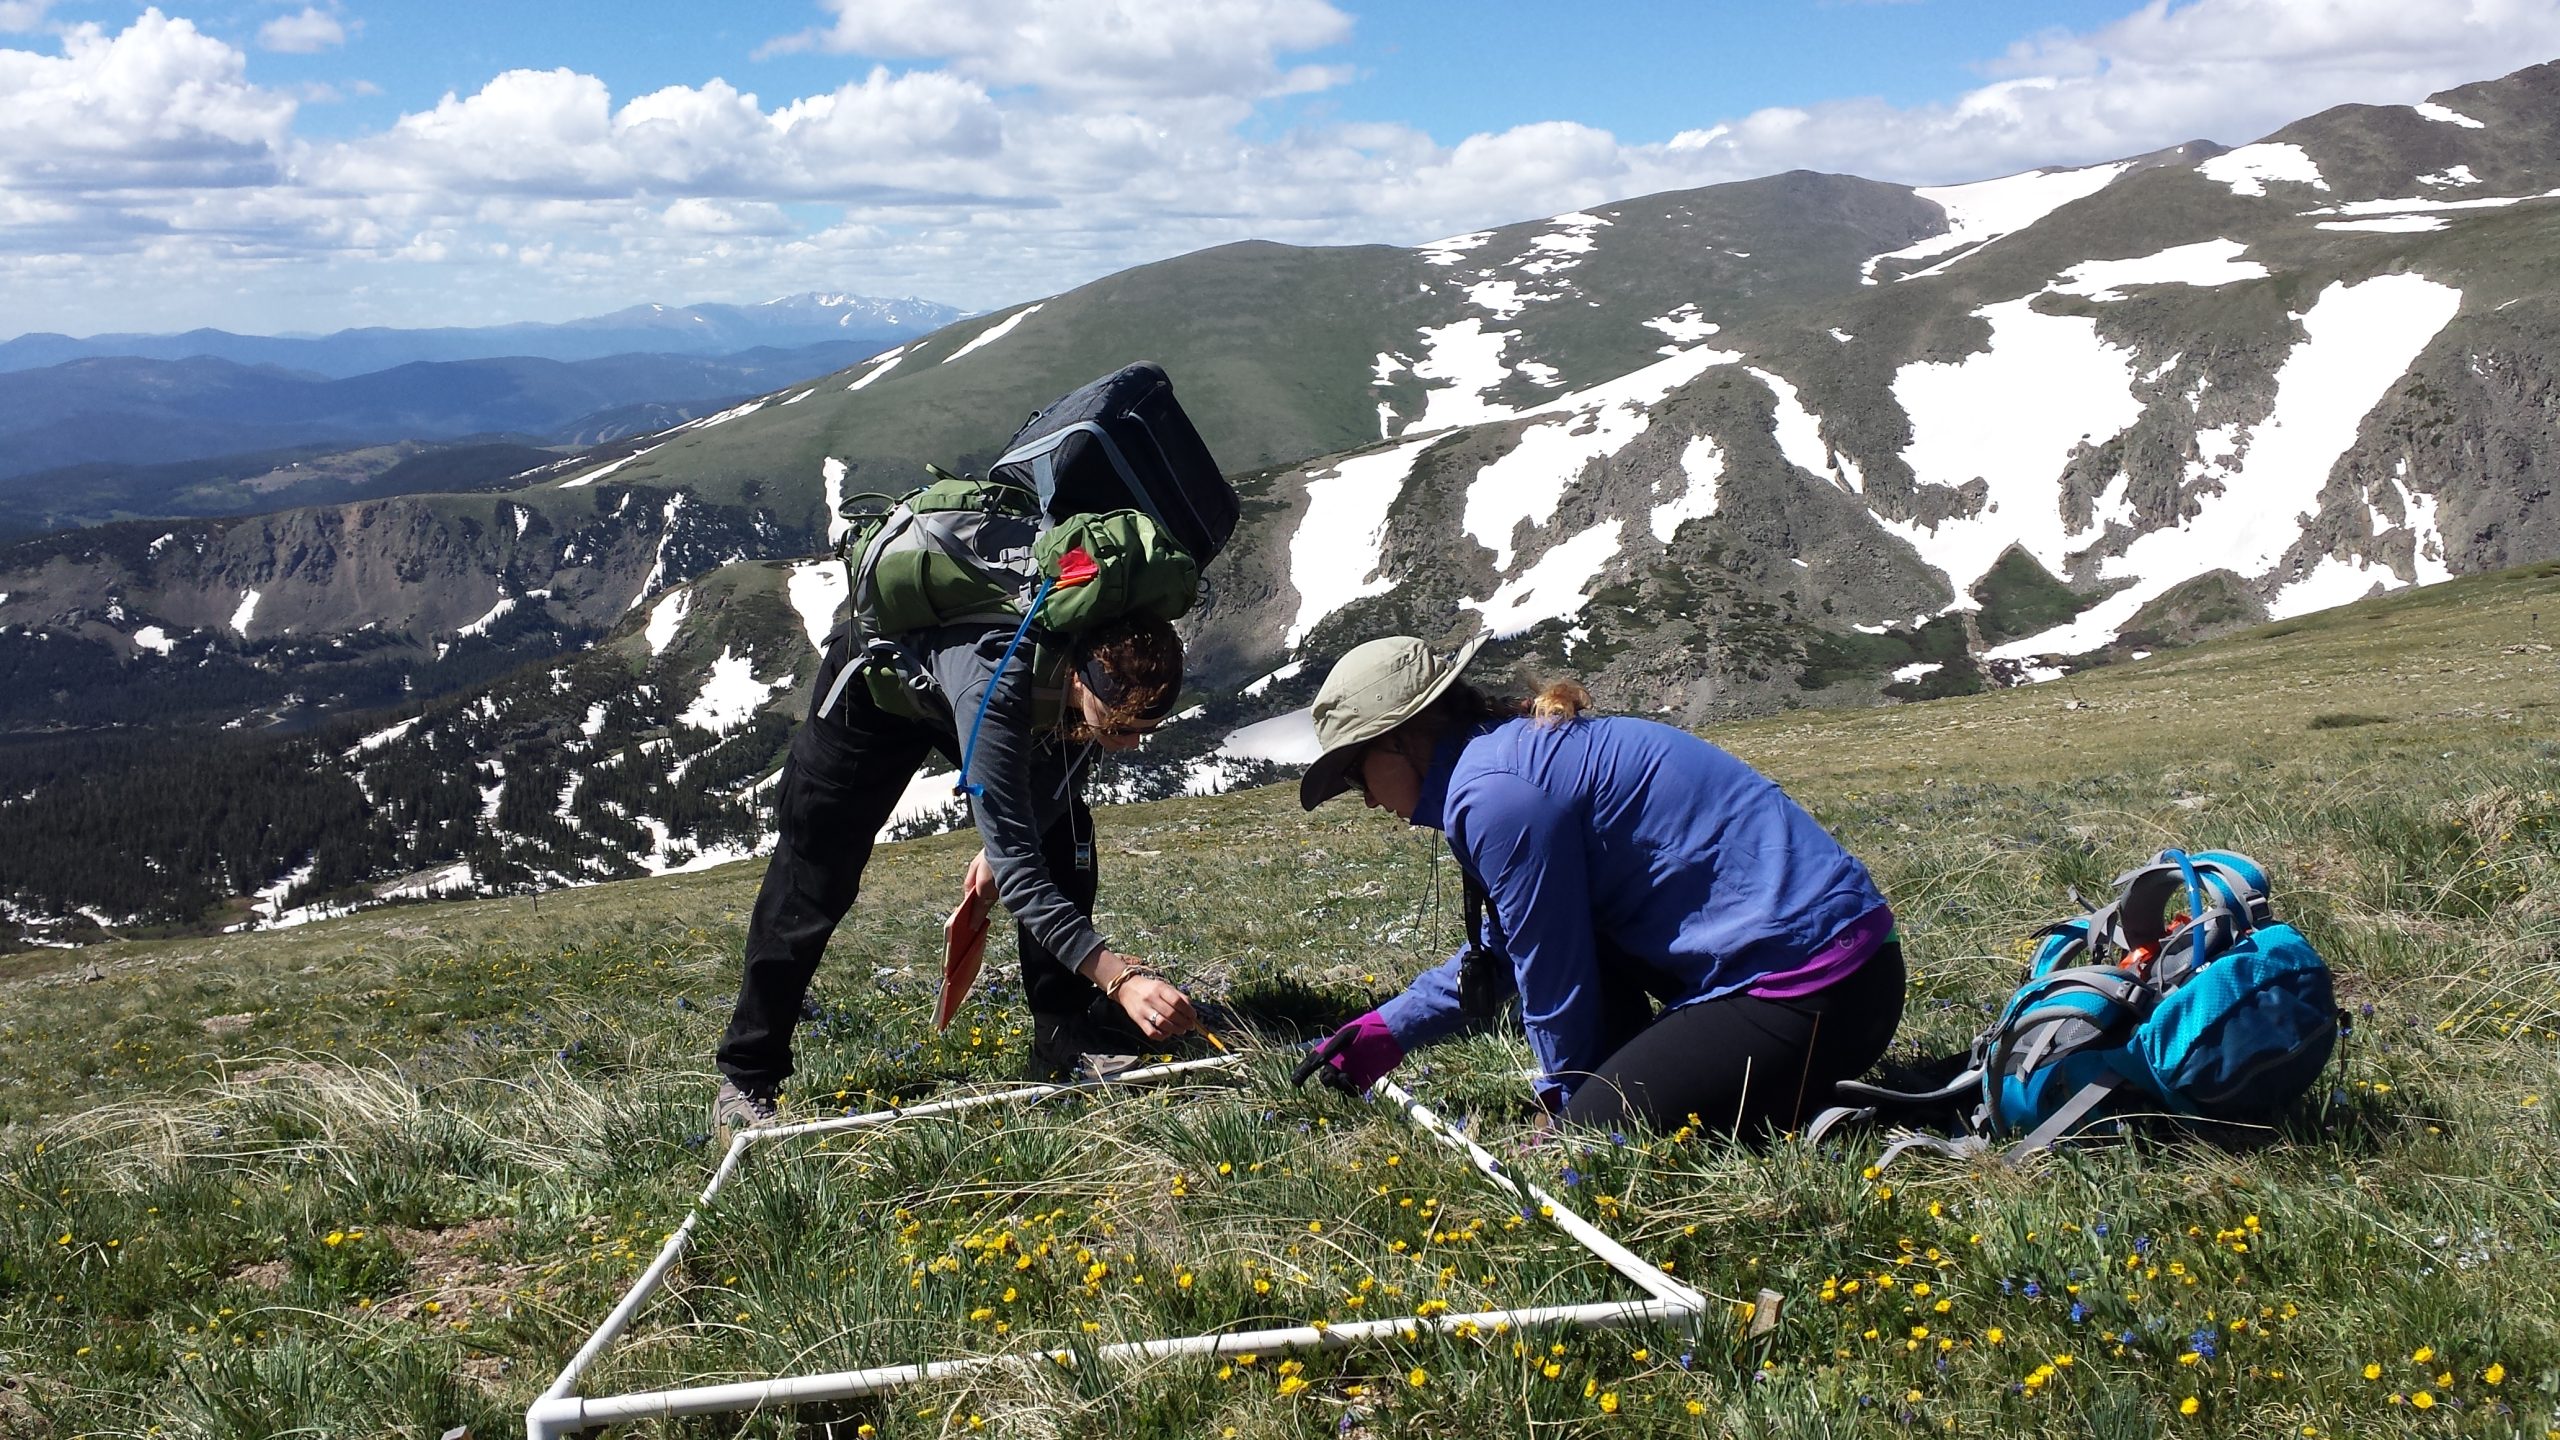 Researchers examine a patch of grass and flowers on a grassy mountain with snow covered mountains in the background.